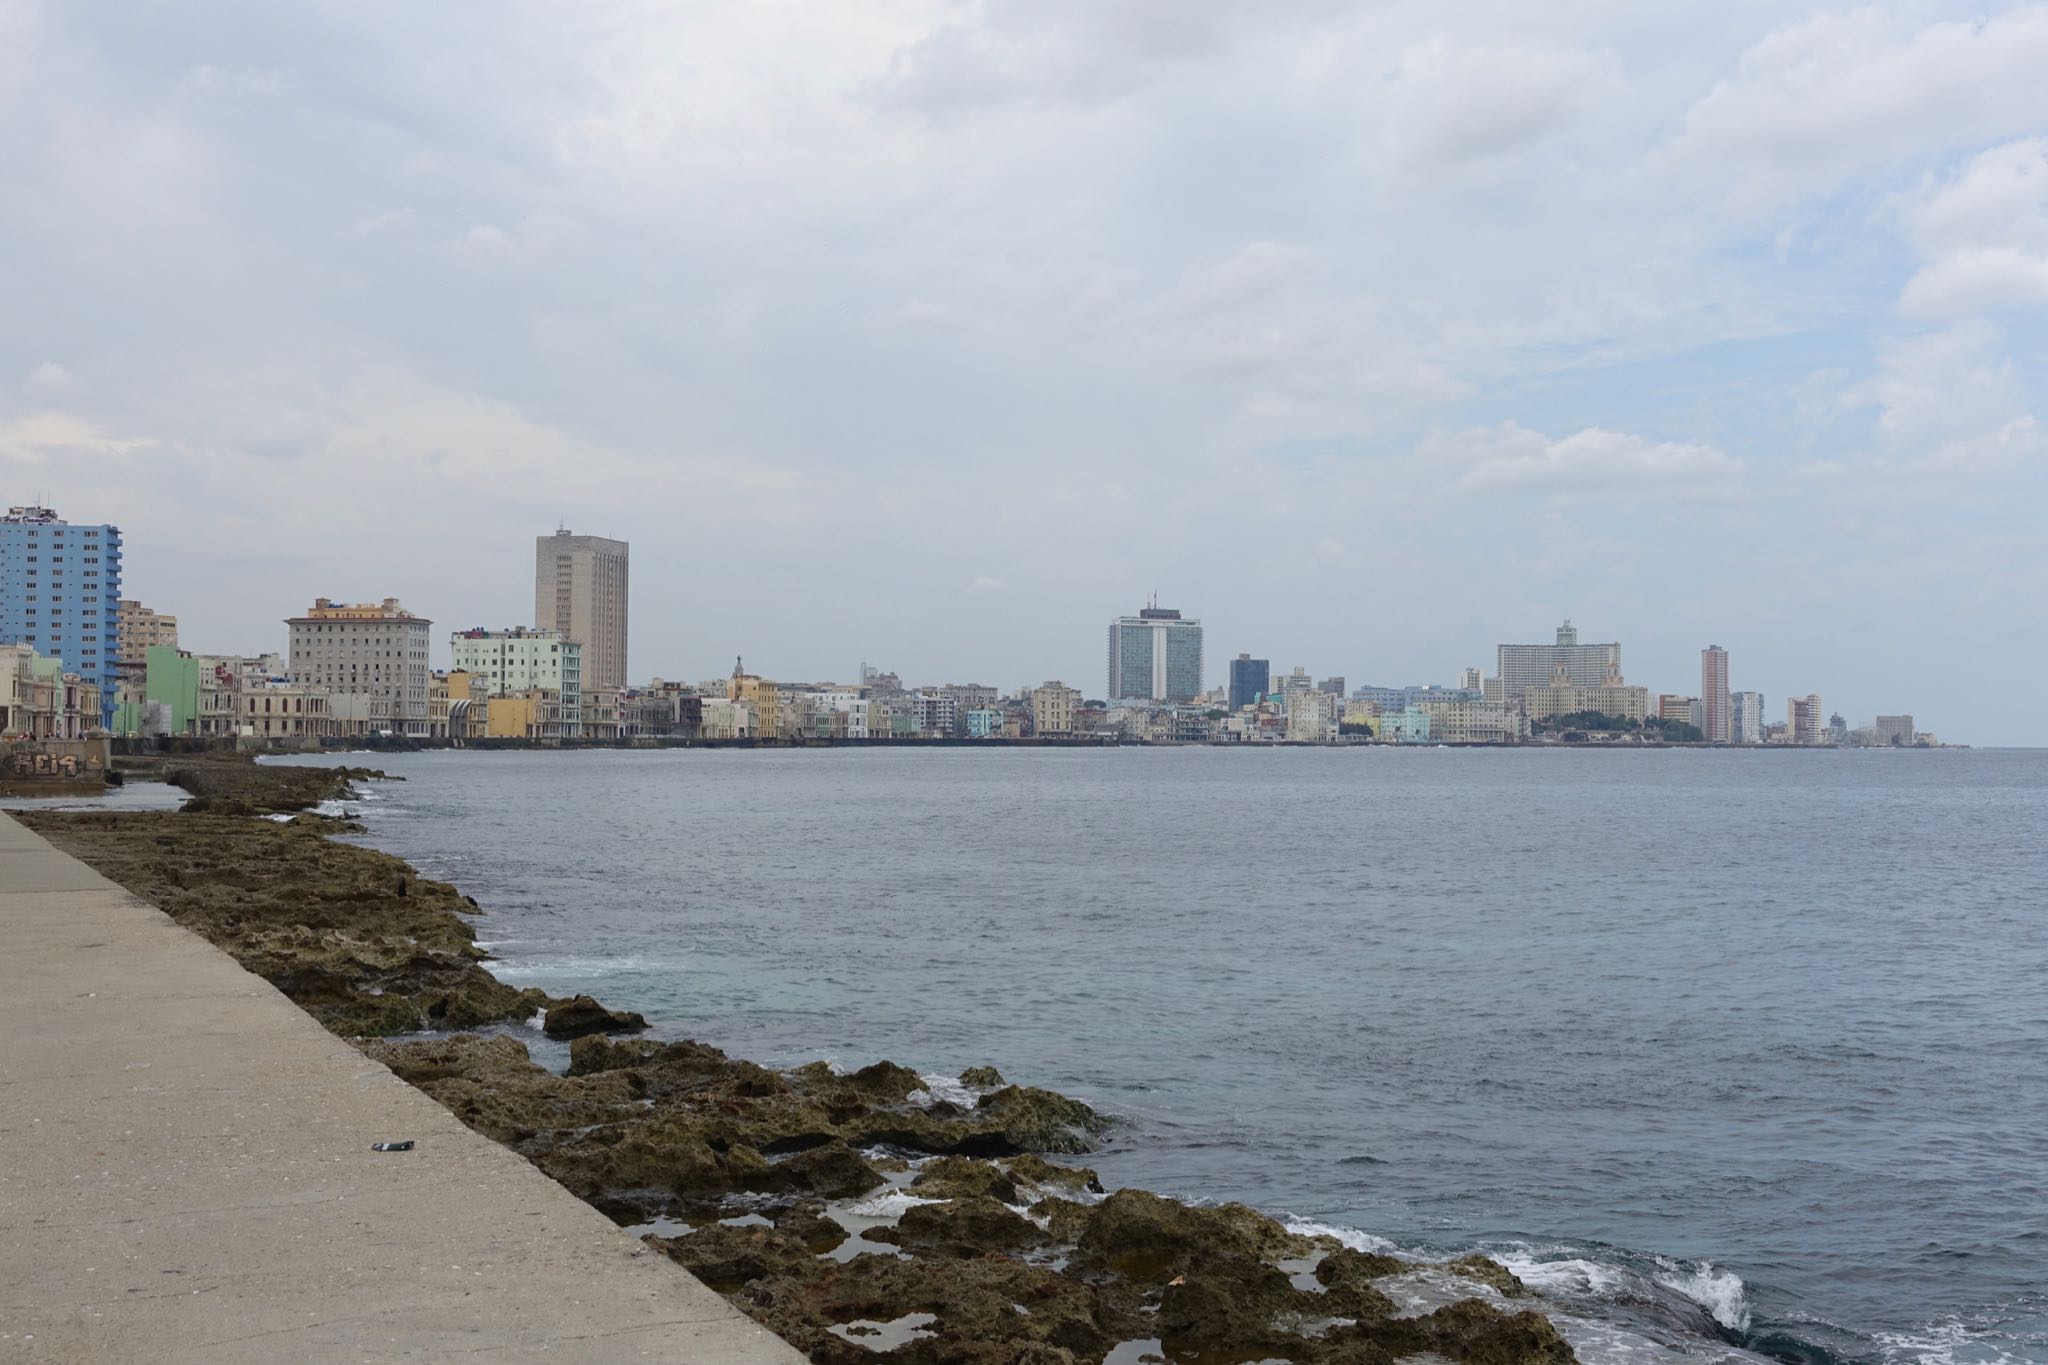 Photo 31 of 221 from the album Highlights Cuba 2019.